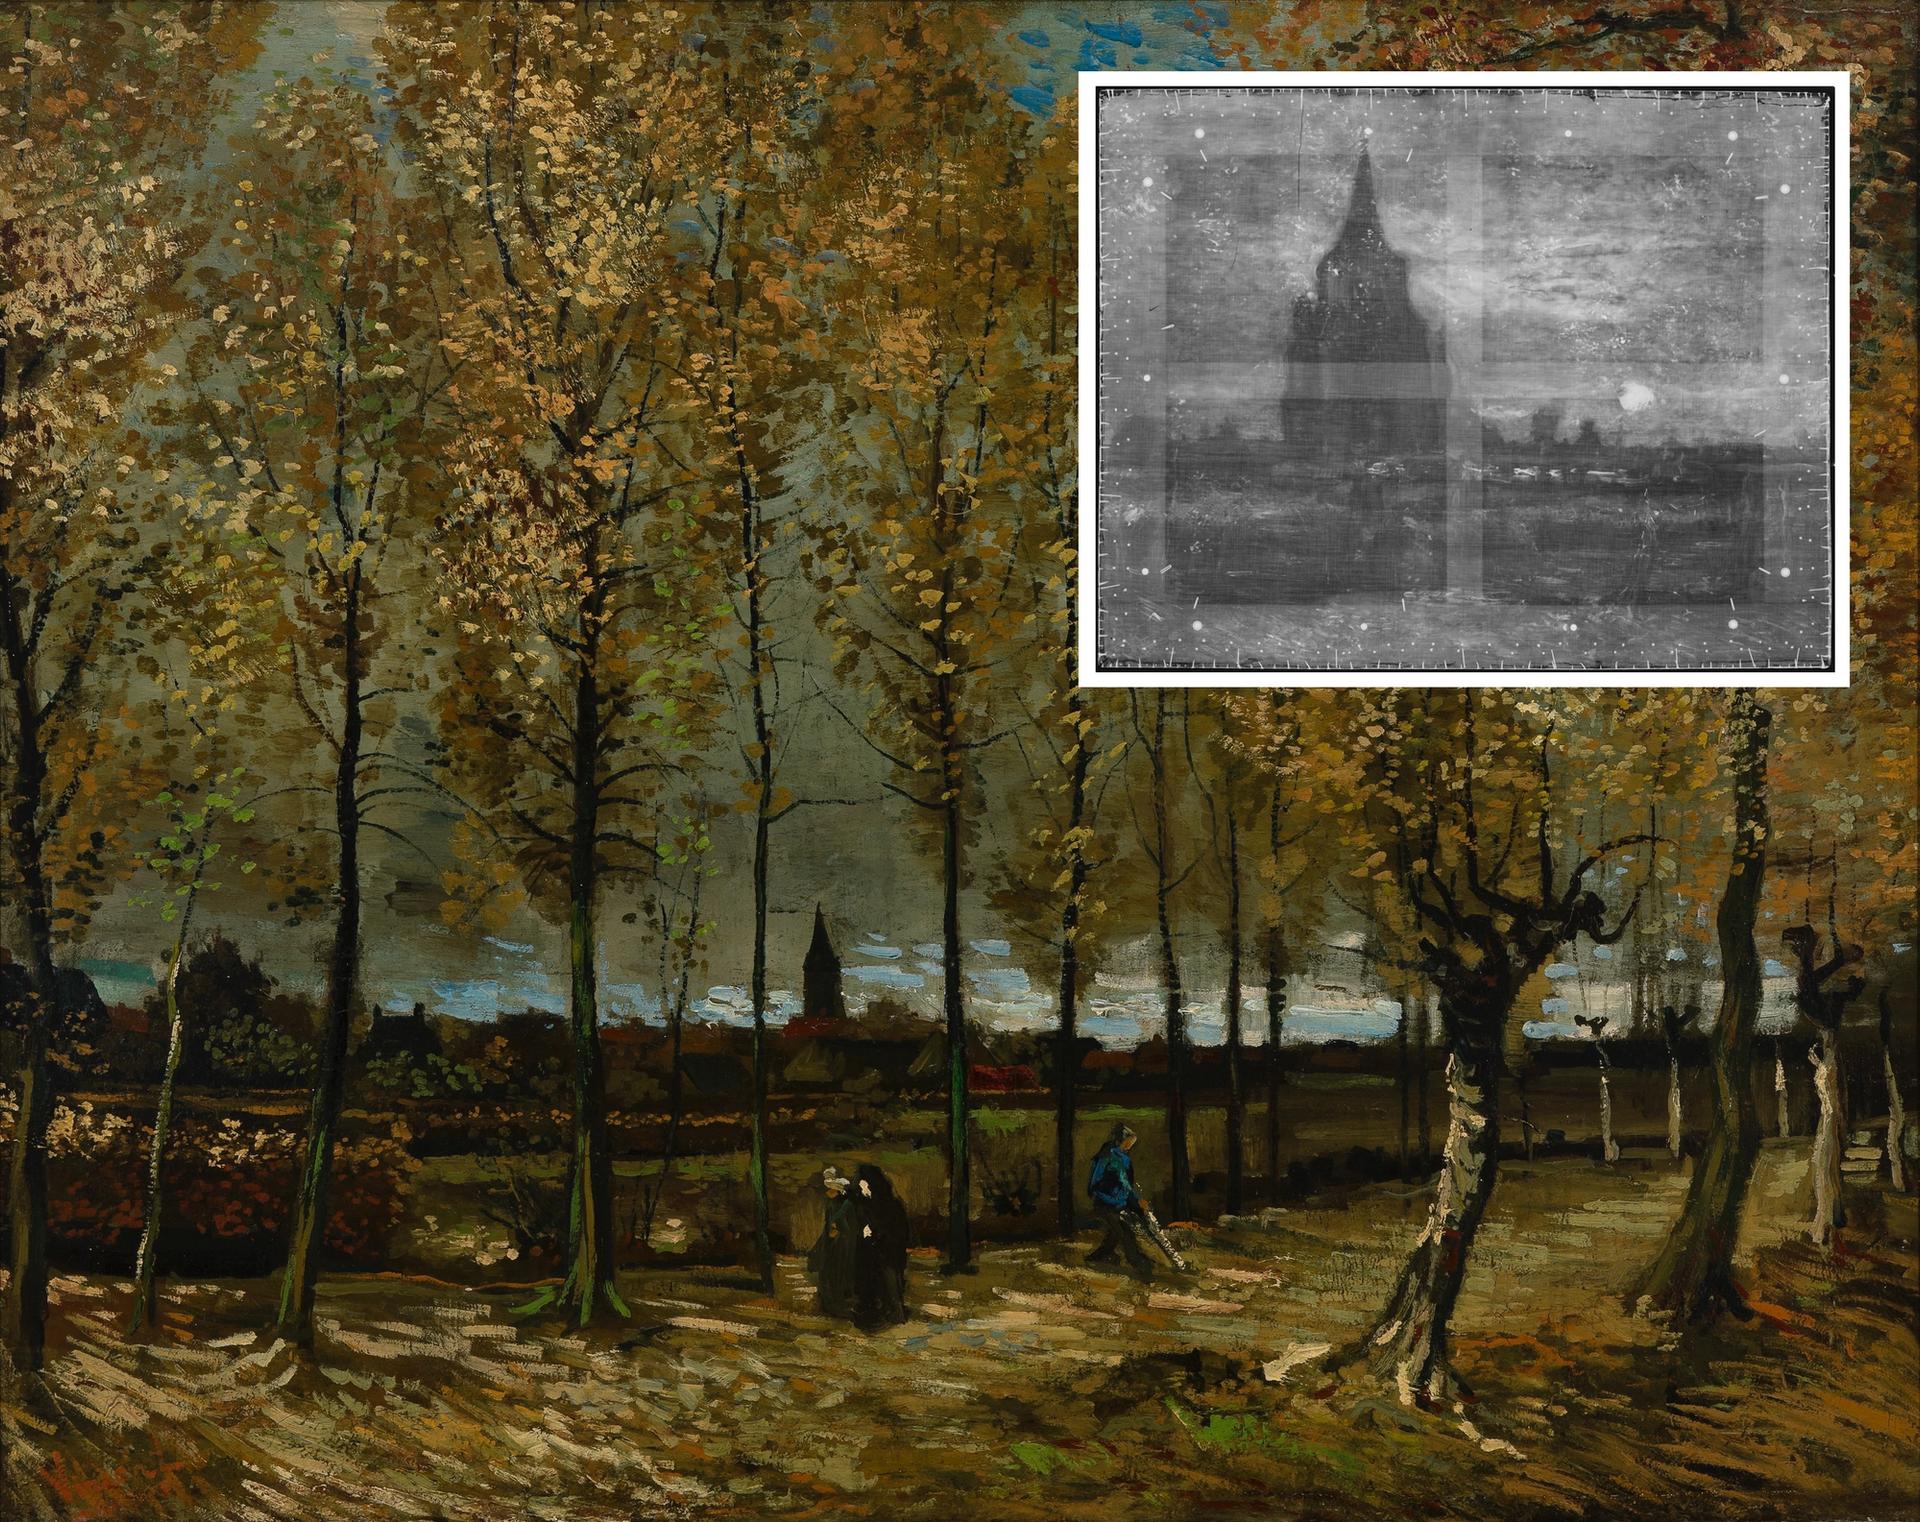 Van Gogh’s Poplars near Nuenen (November 1885 and possibly spring 1886) and, top right, an X-ray image of the work, showing an earlier composition of the old church tower and cemetery, which was overpainted Credit: Museum Boijmans Van Beuningen, Rotterdam 